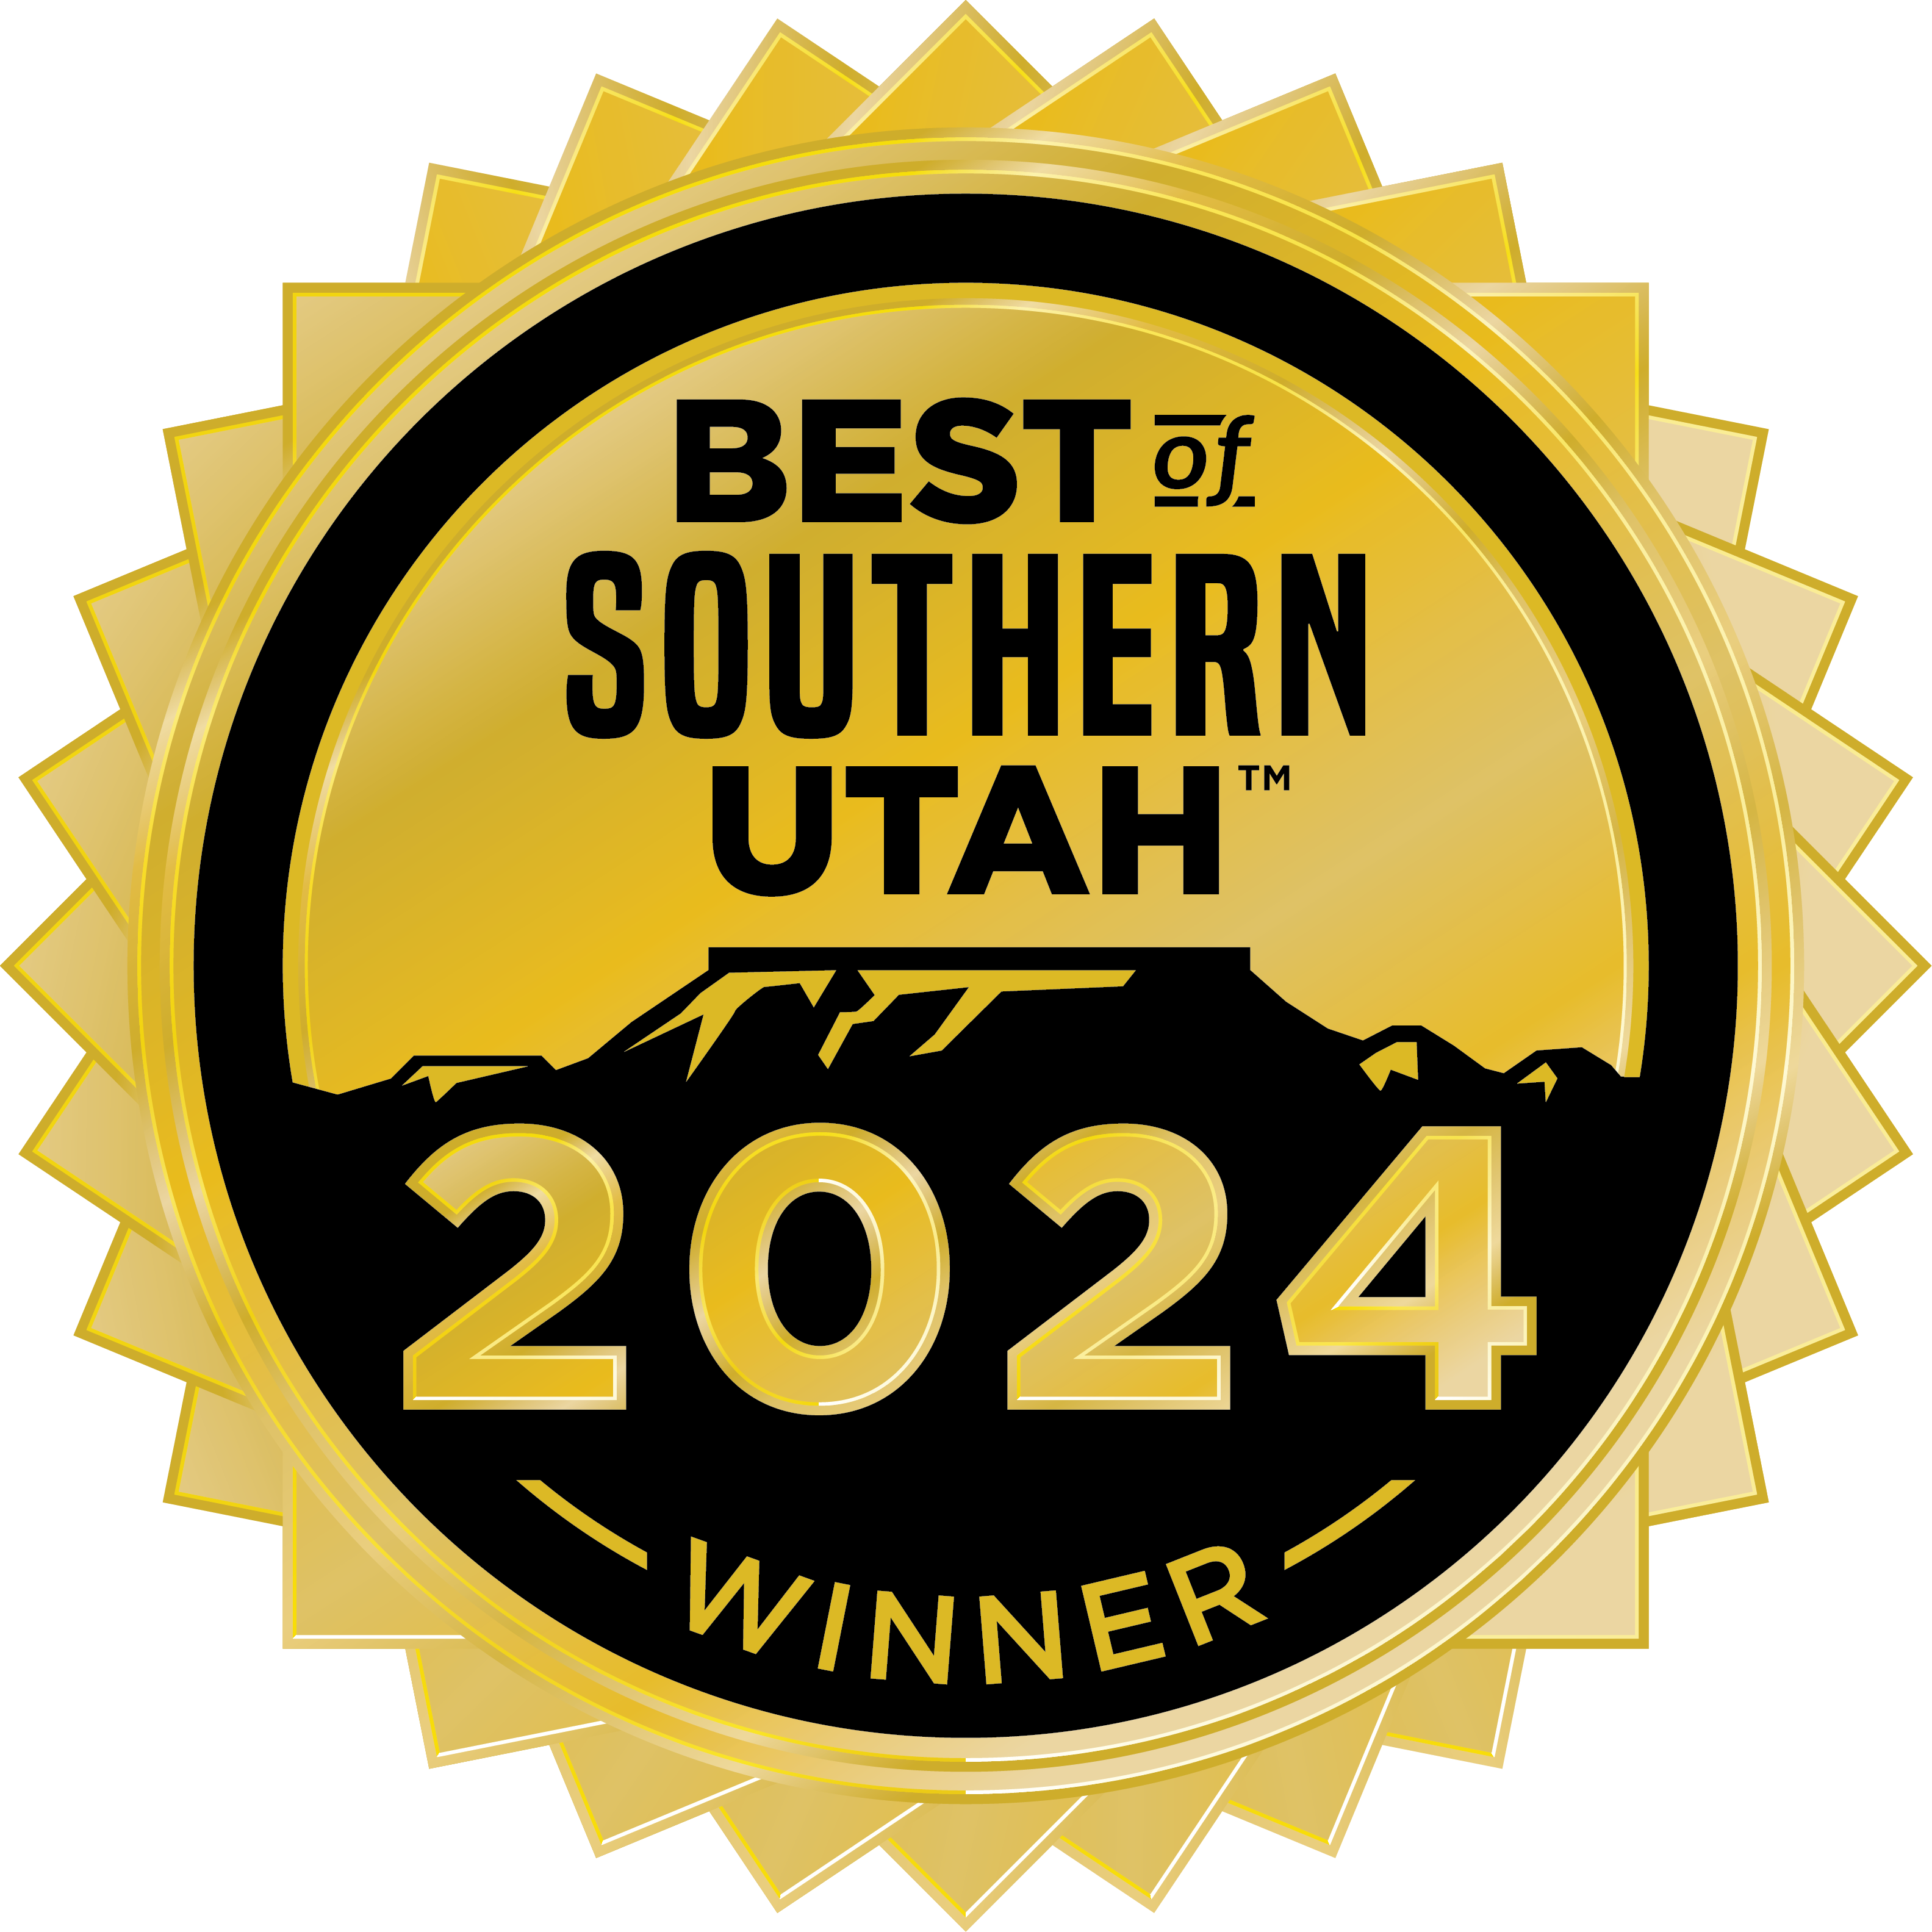 Voted Best Telecom Provider in Southern Utah